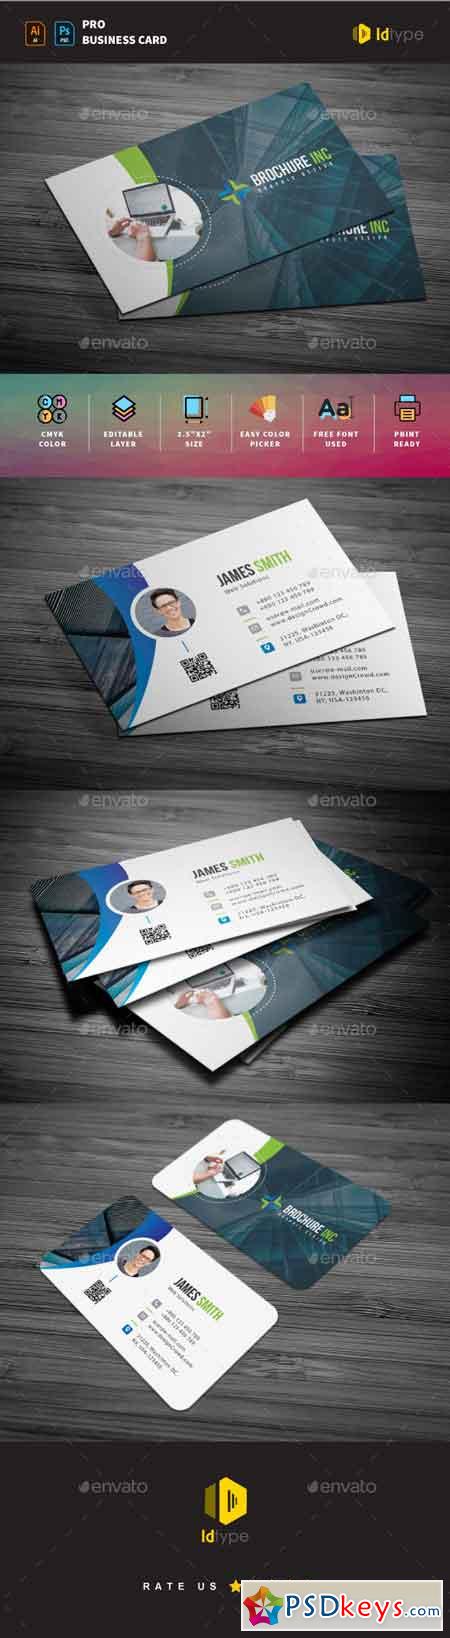 Business Card 22852086